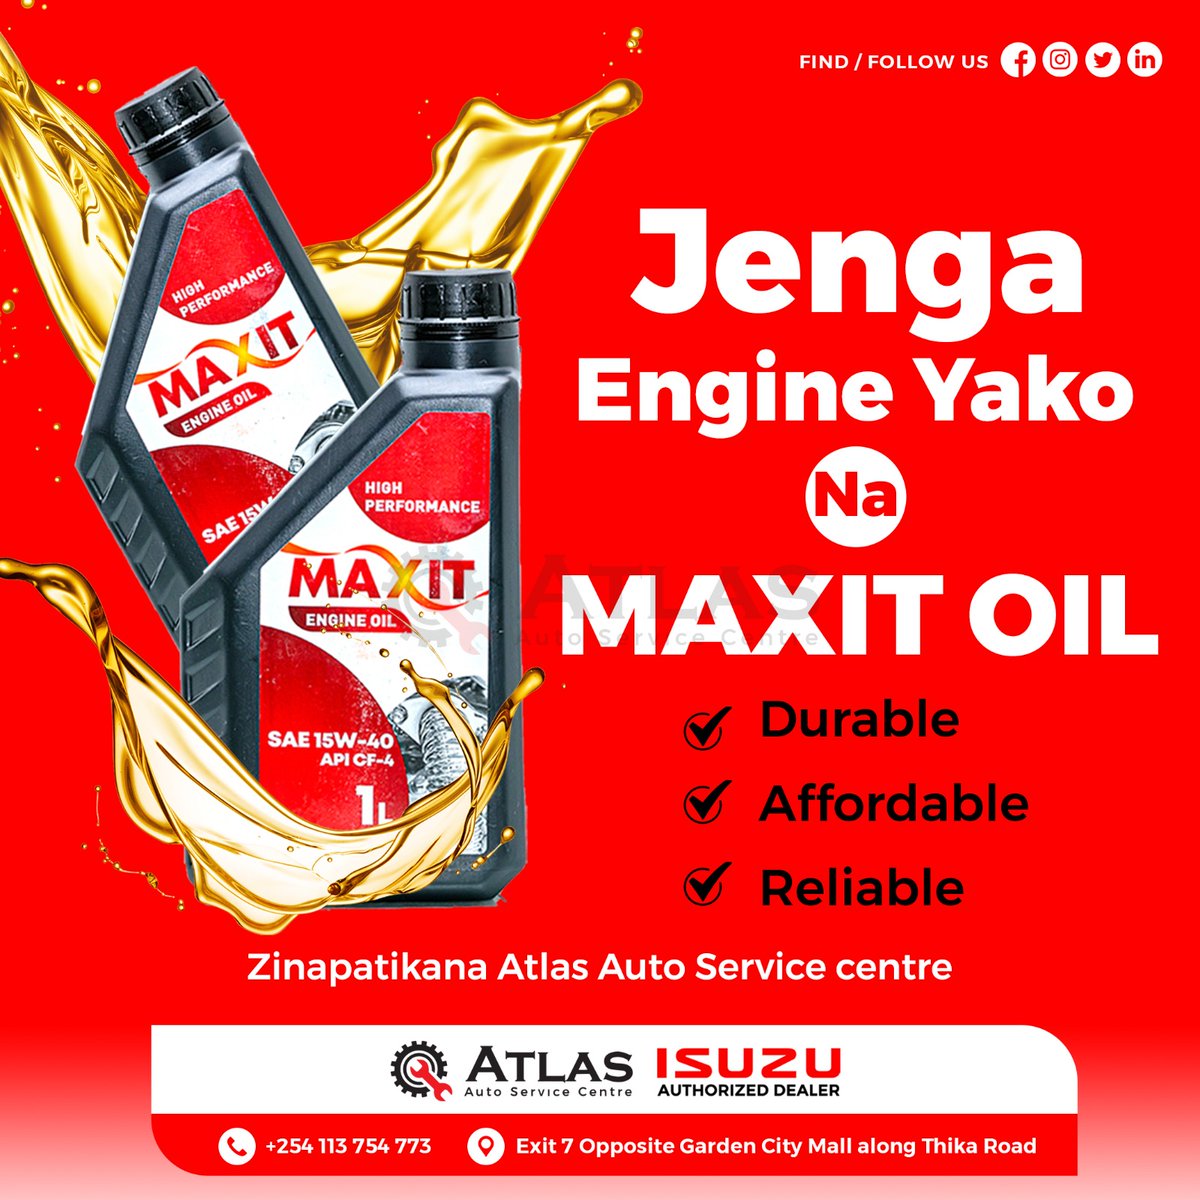 Build a strong foundation with your engine using MAXIT OIL!💪🚗Fuel your ride with durability, affordability, and reliability.Swing by @Atlasautocentre today and give your car the care it deserves.#howcanwehelp #garage #isuzu #MAXITOIL #EngineHealth #dollars #jowie #TechGoesWild